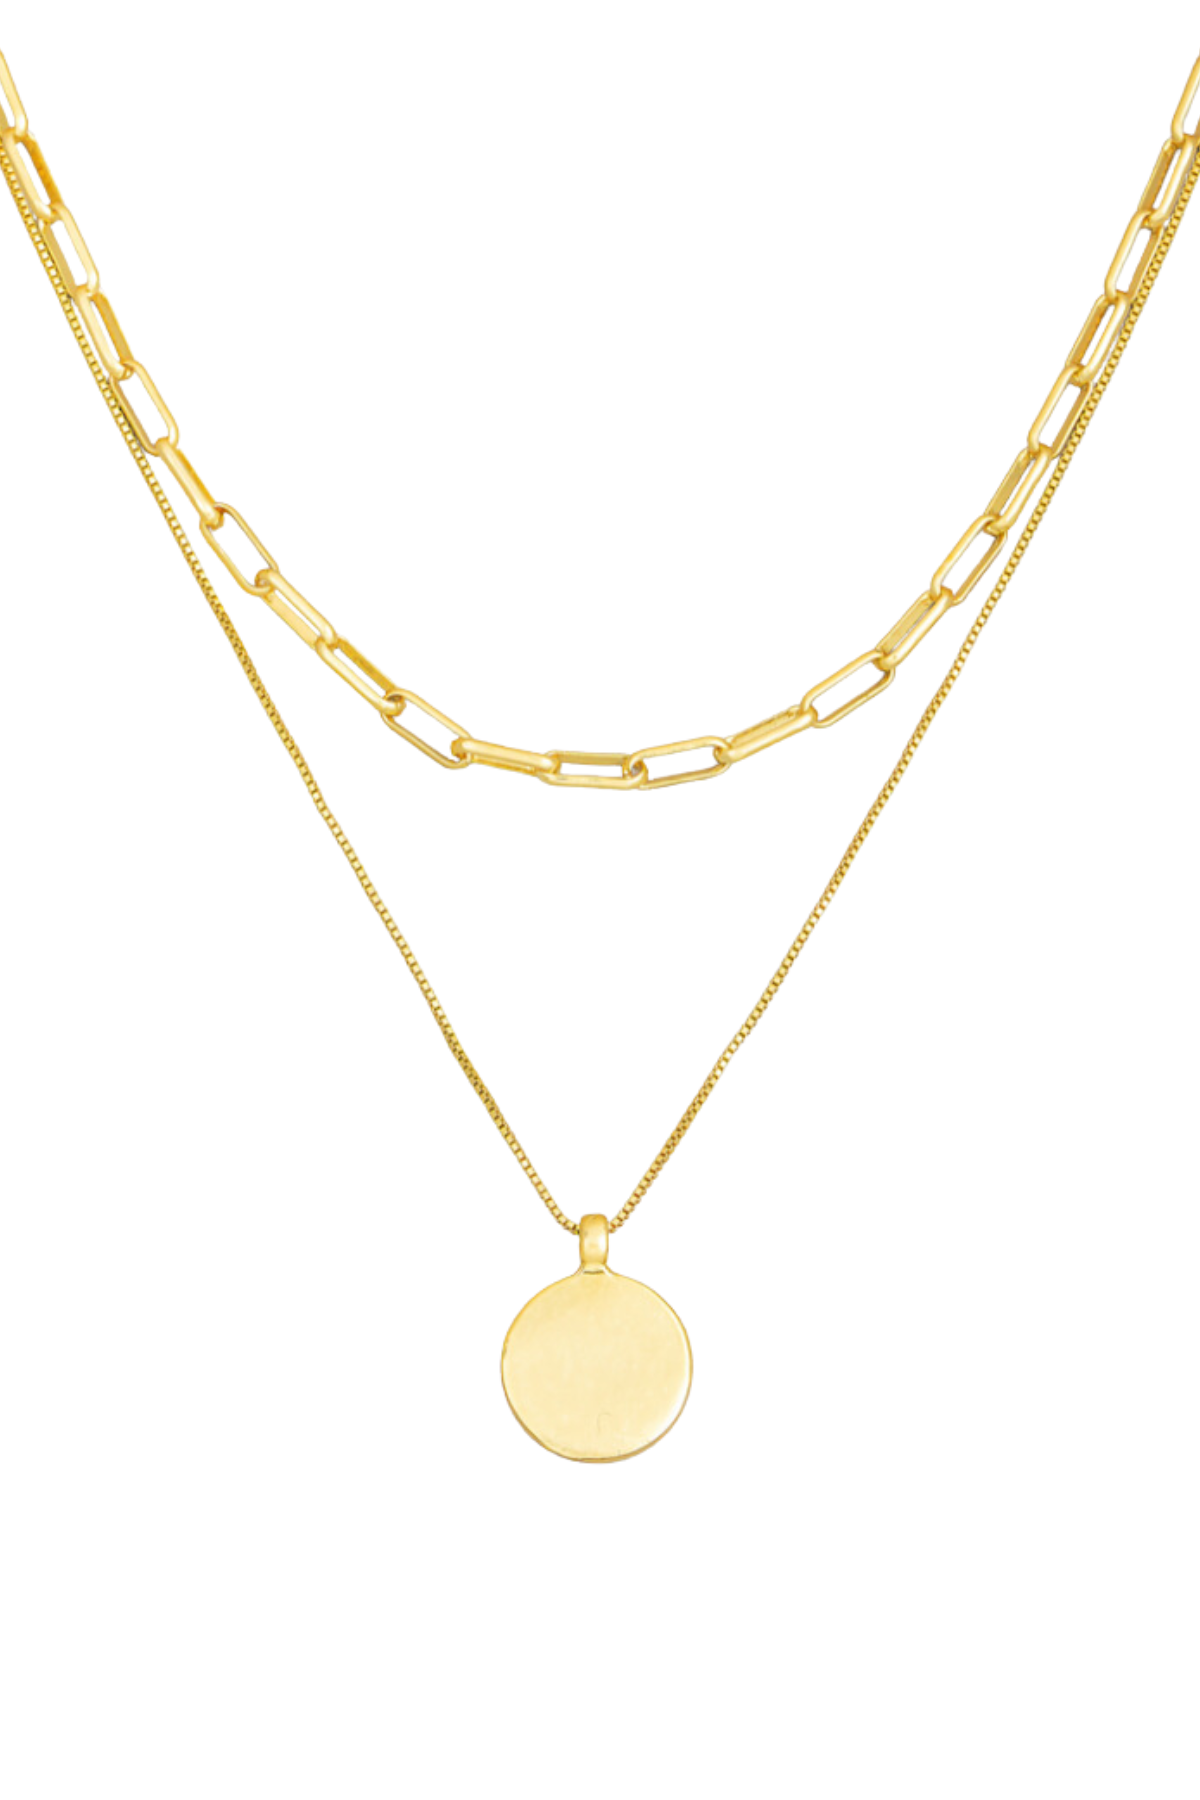 Cara Gold Dipped Necklace